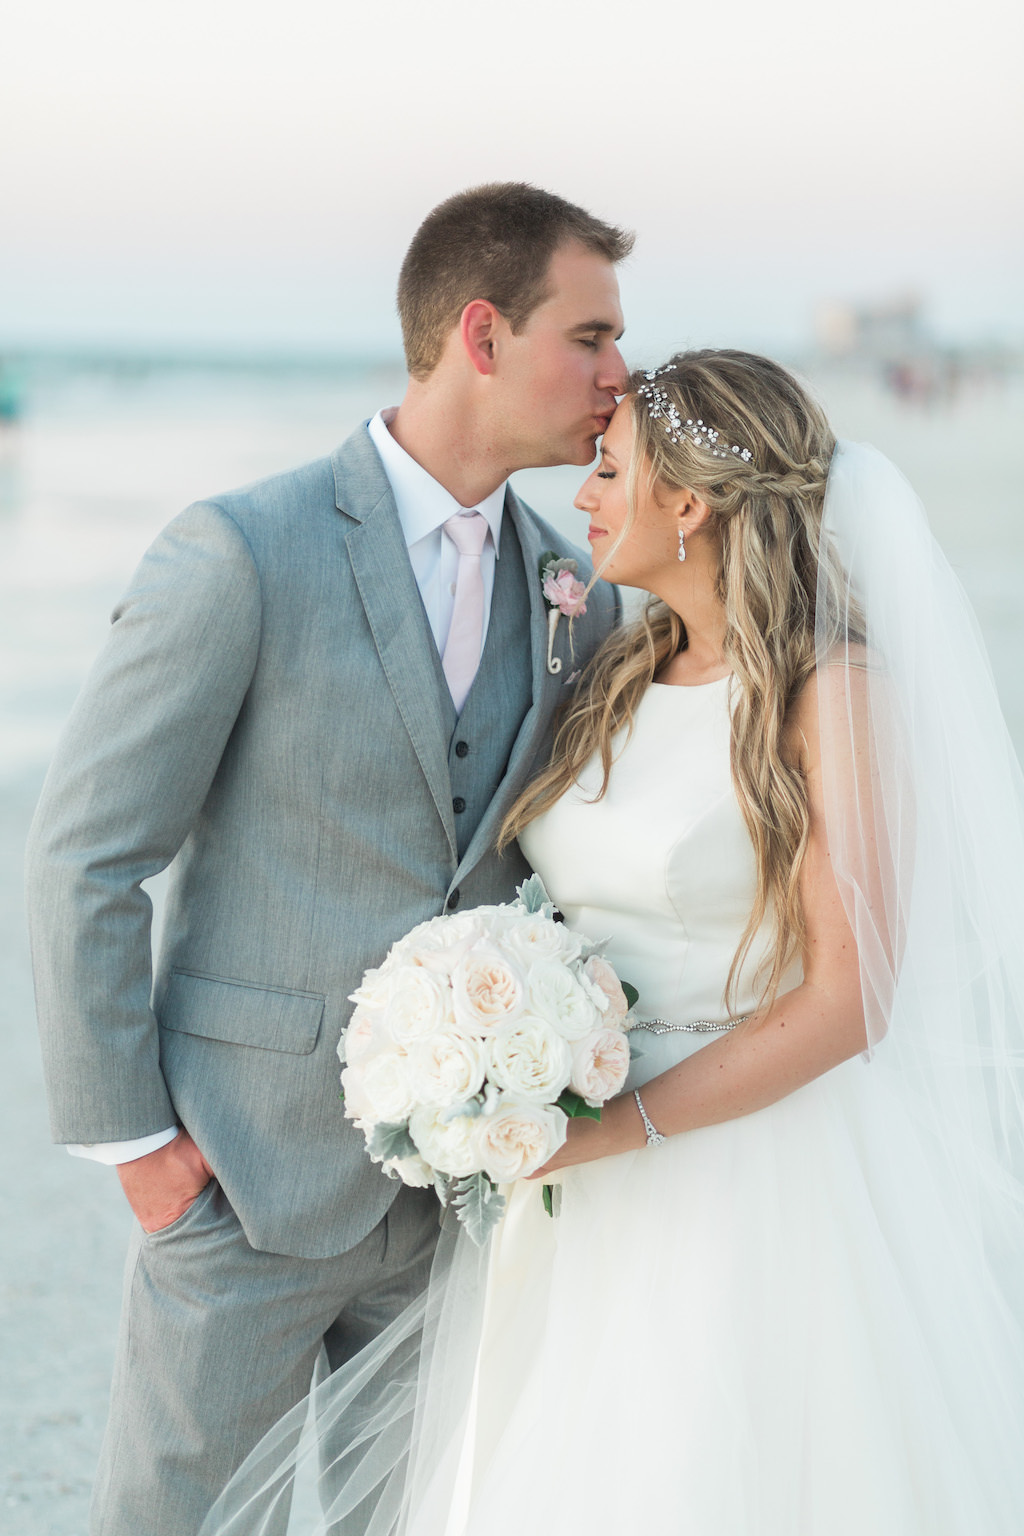 Outdoor Beach Wedding Bride and Groom Portrait, Groom in Gray Suit with Blush Pink Tie and Rose Boutonniere, Bride in Halter Ballgown Hayley Paige Wedding Dress with White Rose Bouquet and Jeweled Headband | Whimsical Clearwater Beach Wedding